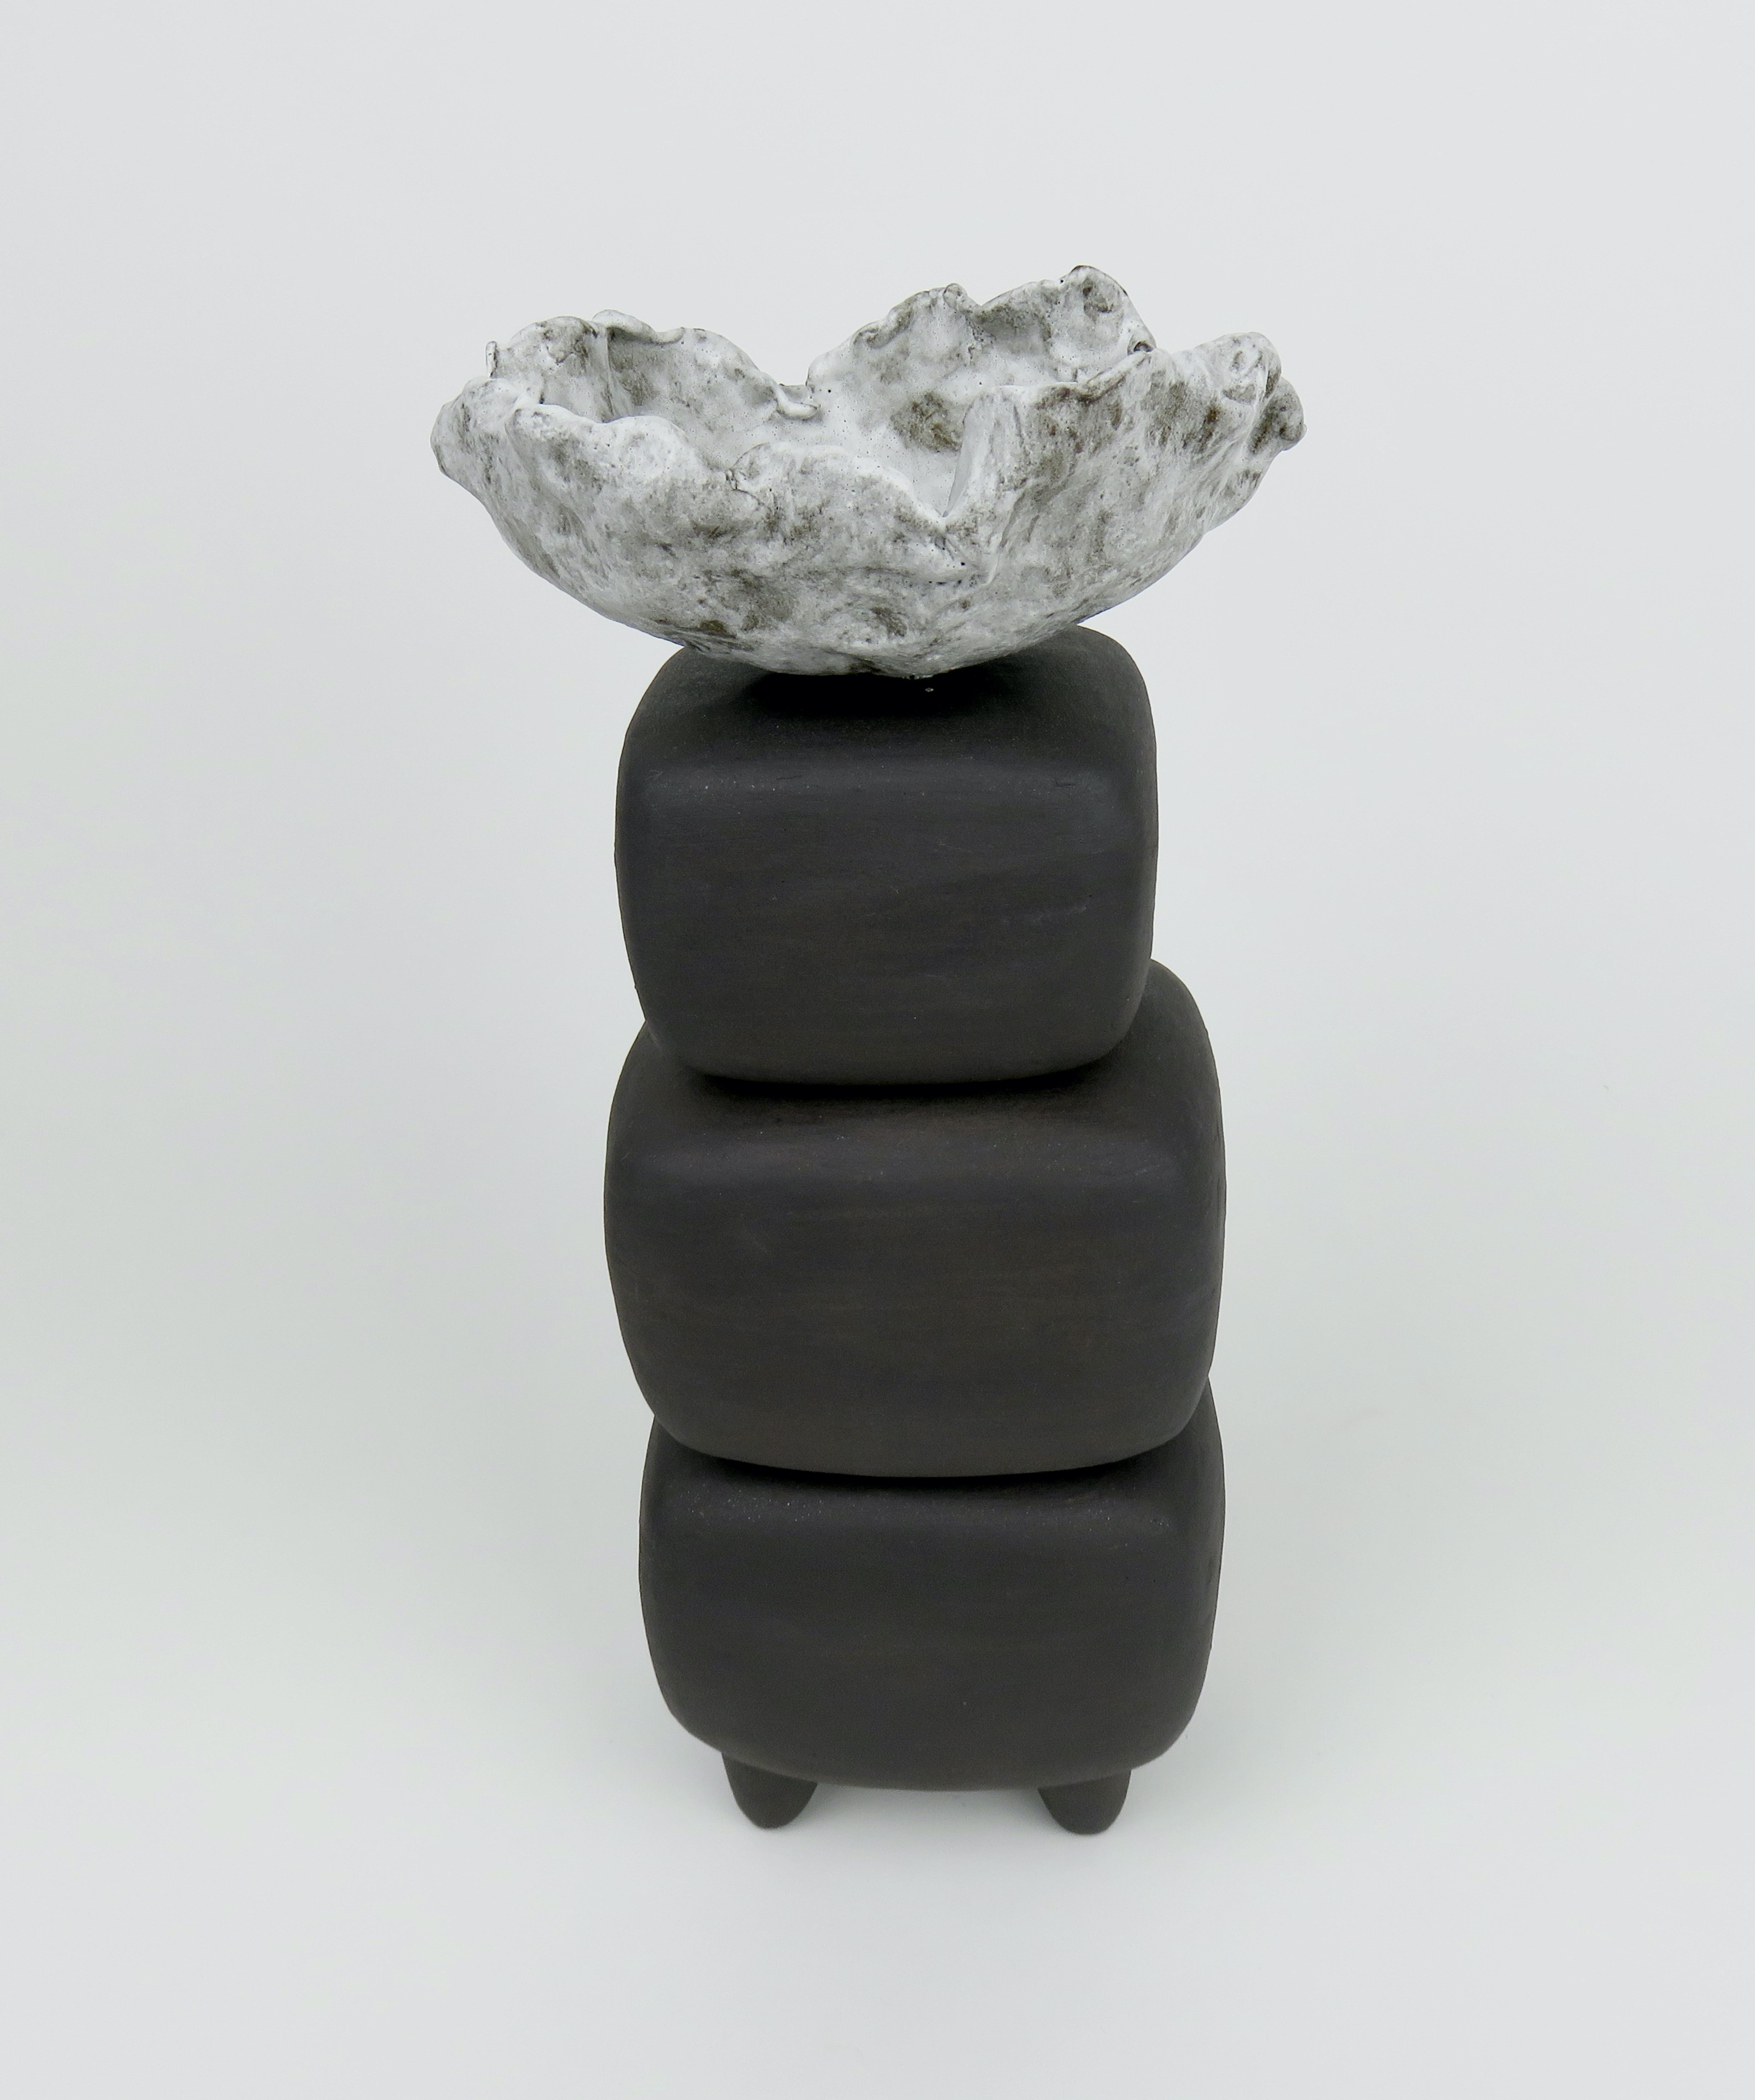 Contemporary Hand Built Ceramic Sculpture, Dark Brown Stacked Cubes with White Crinkled Top